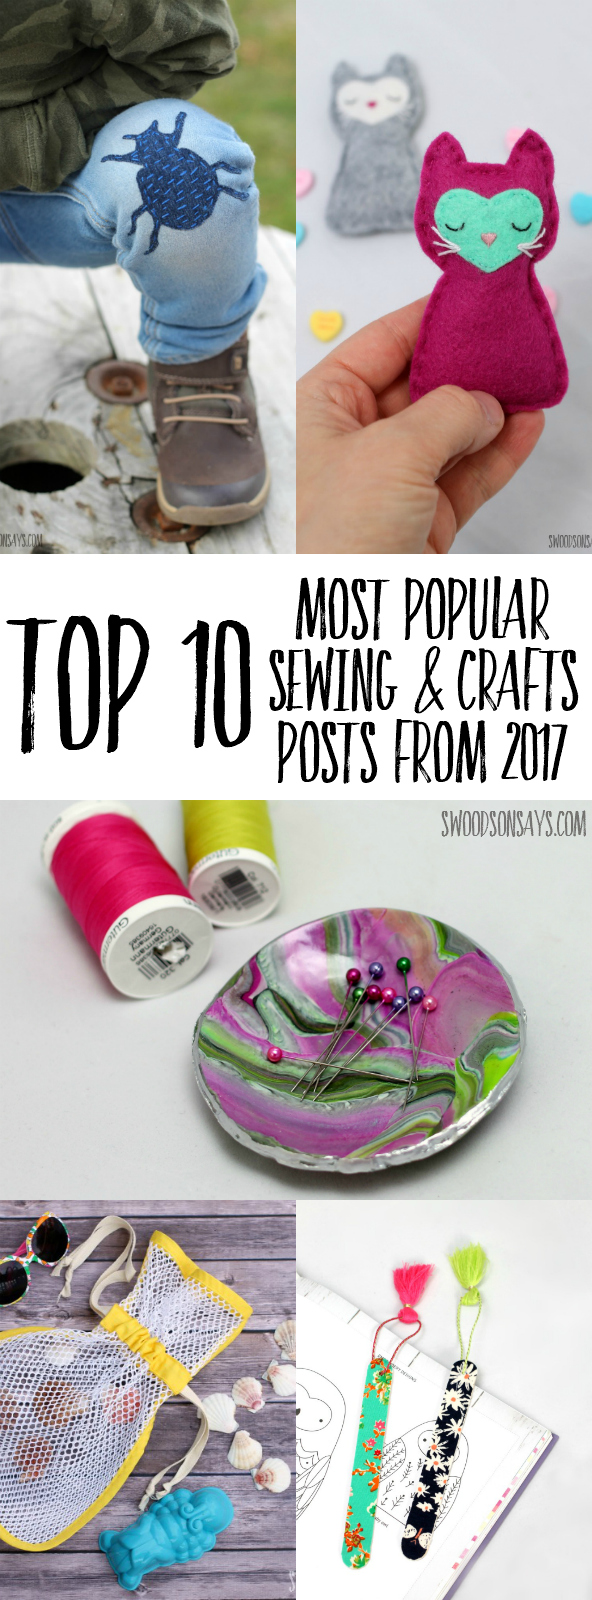 Check out the best craft tutorials and free sewing patterns that were published in 2017 on Swoodsonsays.com! There is something for everyone, get inspiration to try a new craft or method in the new year. #crafts #diy #sewing